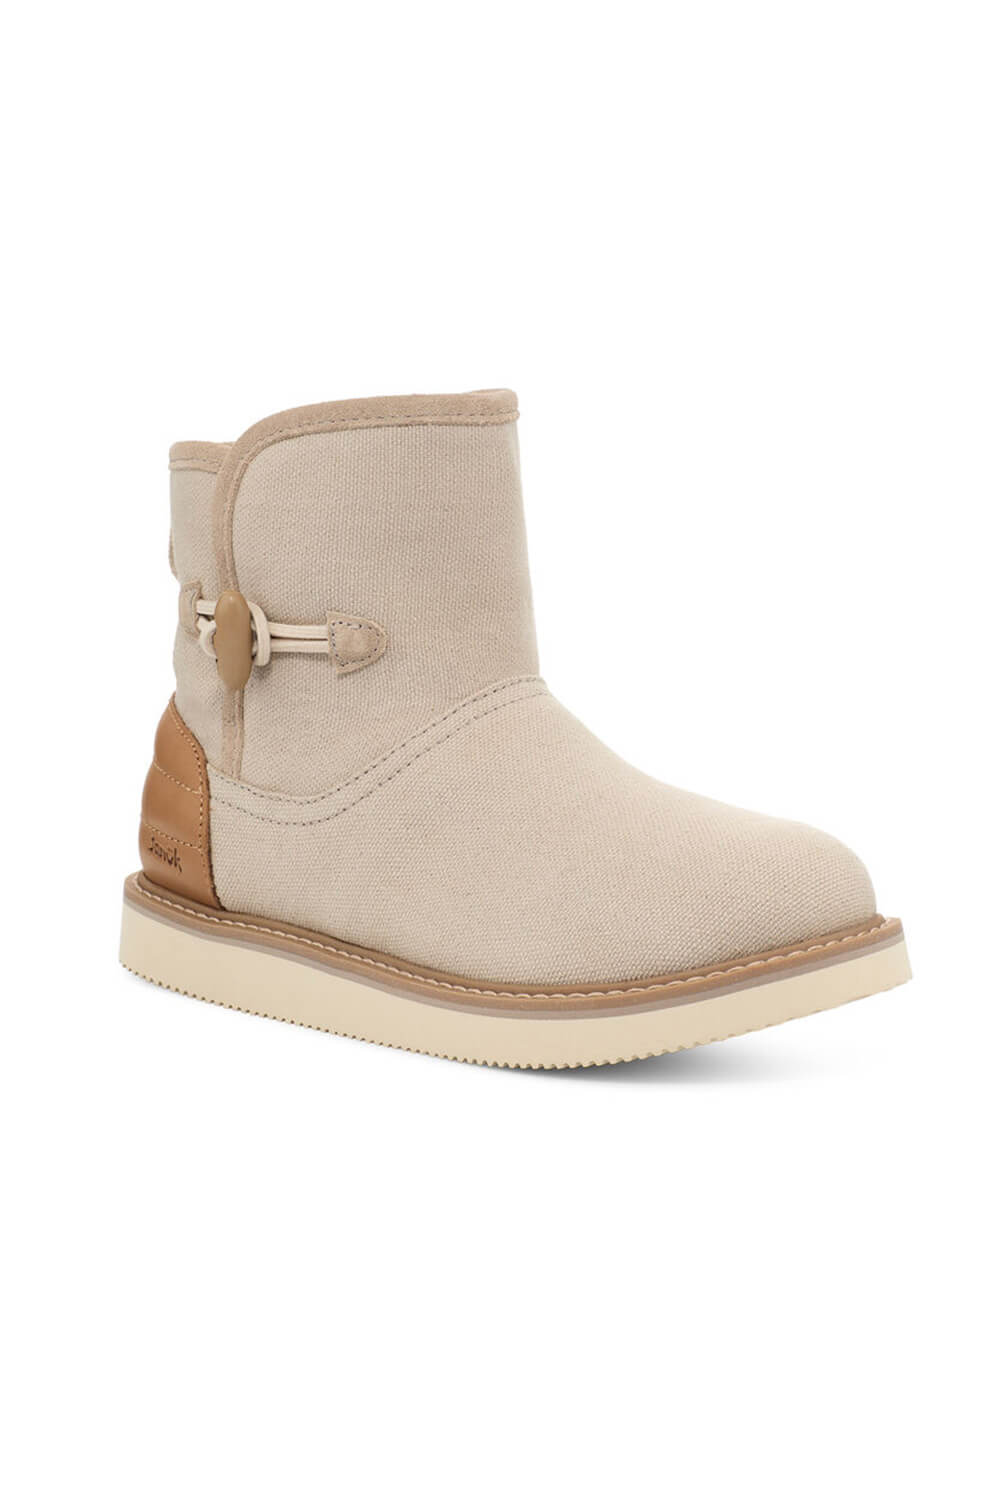 Sanuk Cozy Vibe Surf Booties for Women in Ash Grey